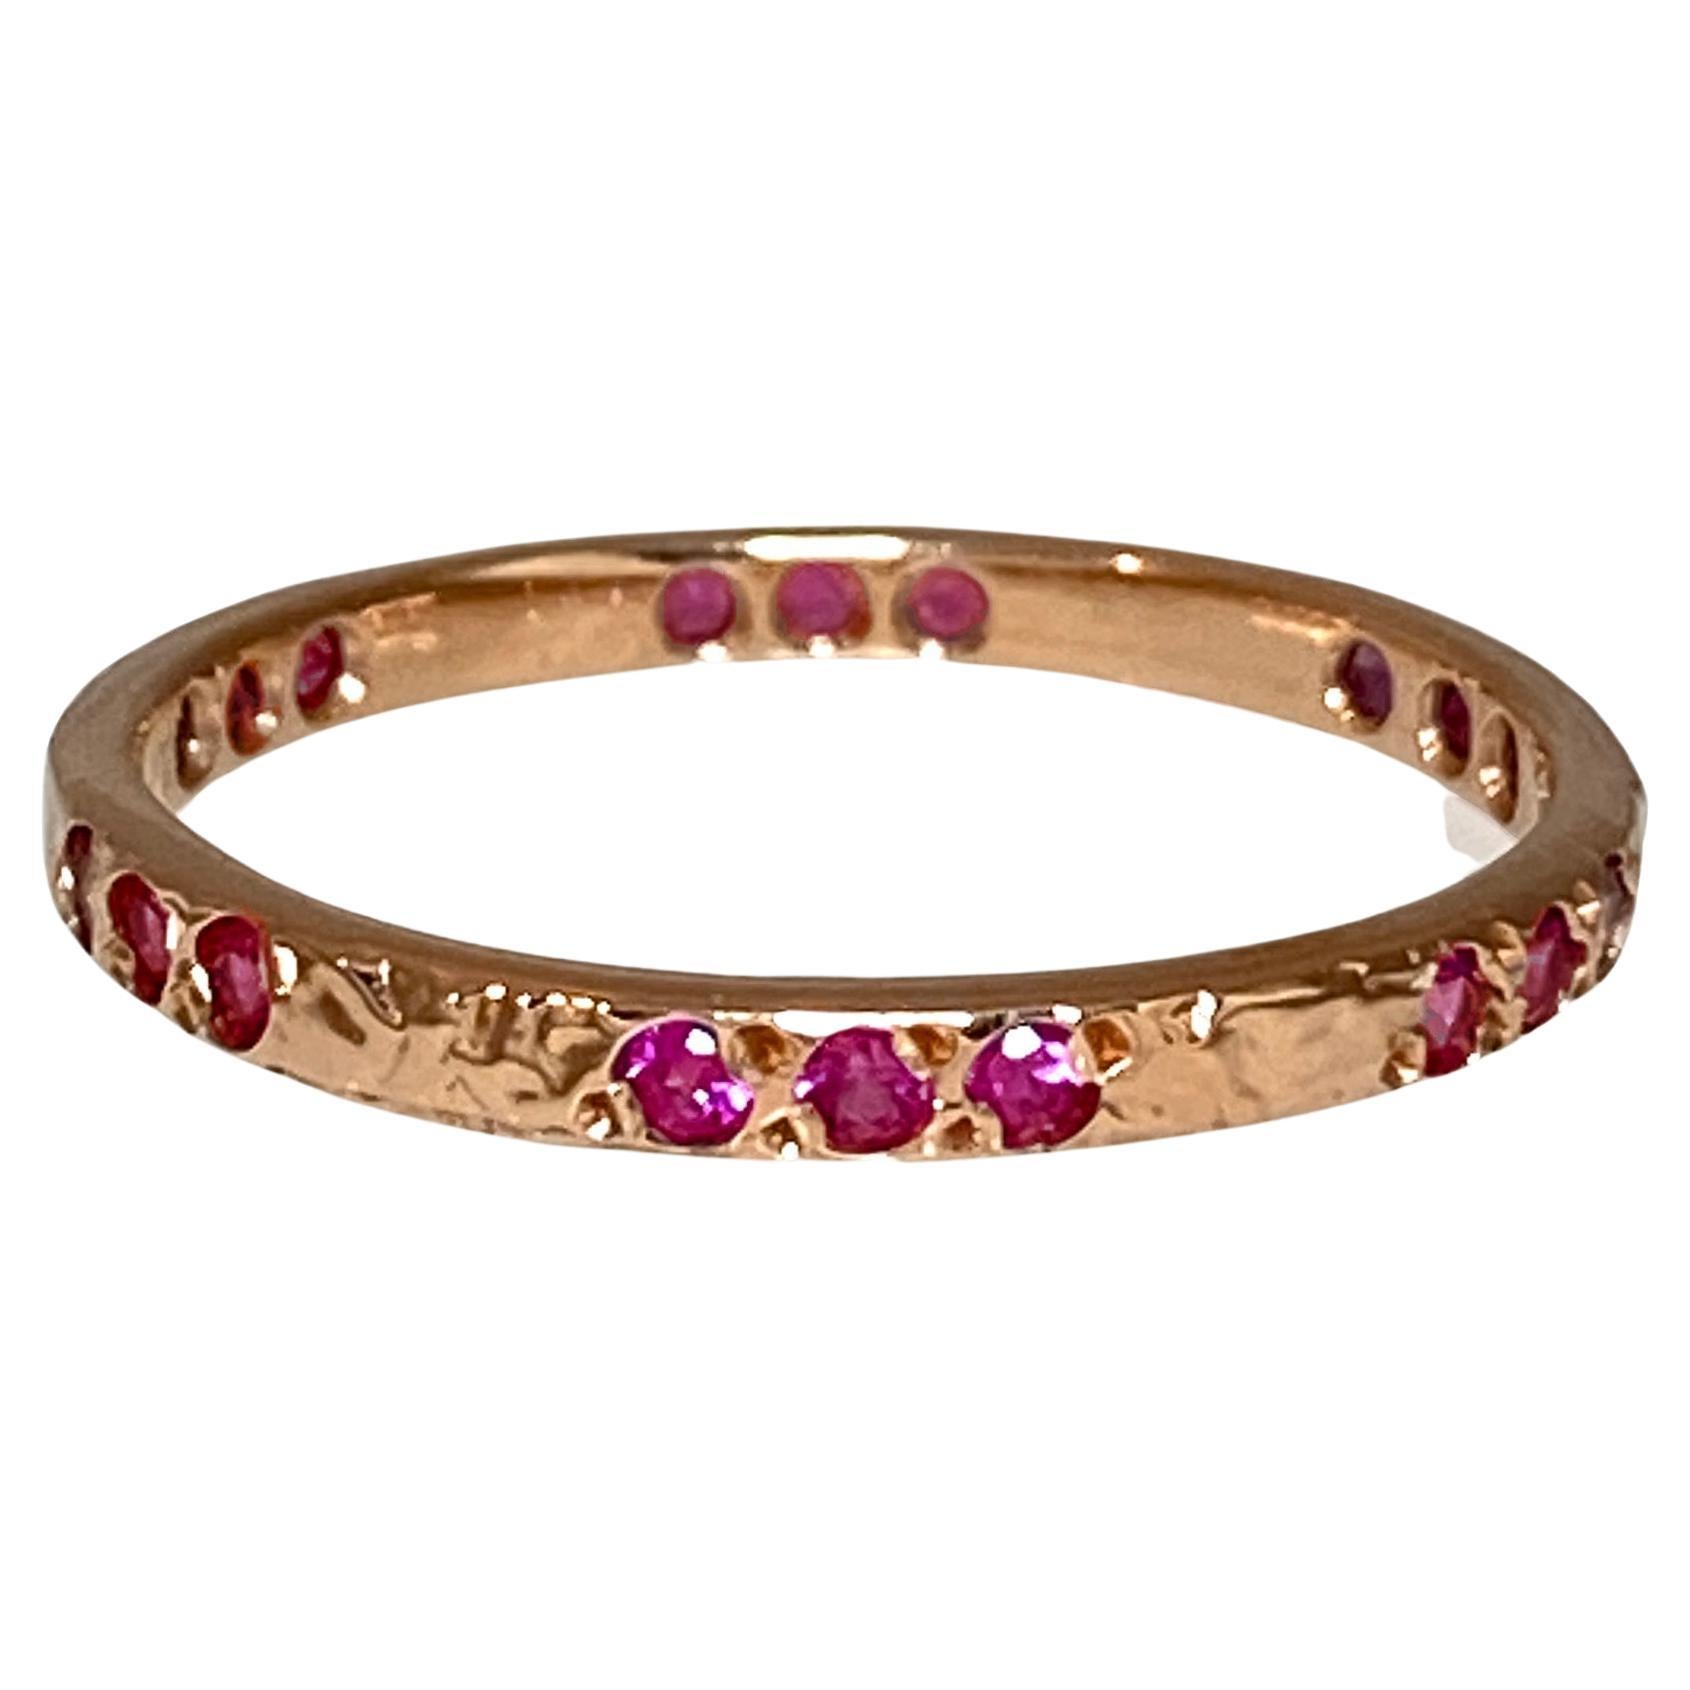 Pink Sapphire in 14 Karat Textured Rose Gold band from K.MITA - Small